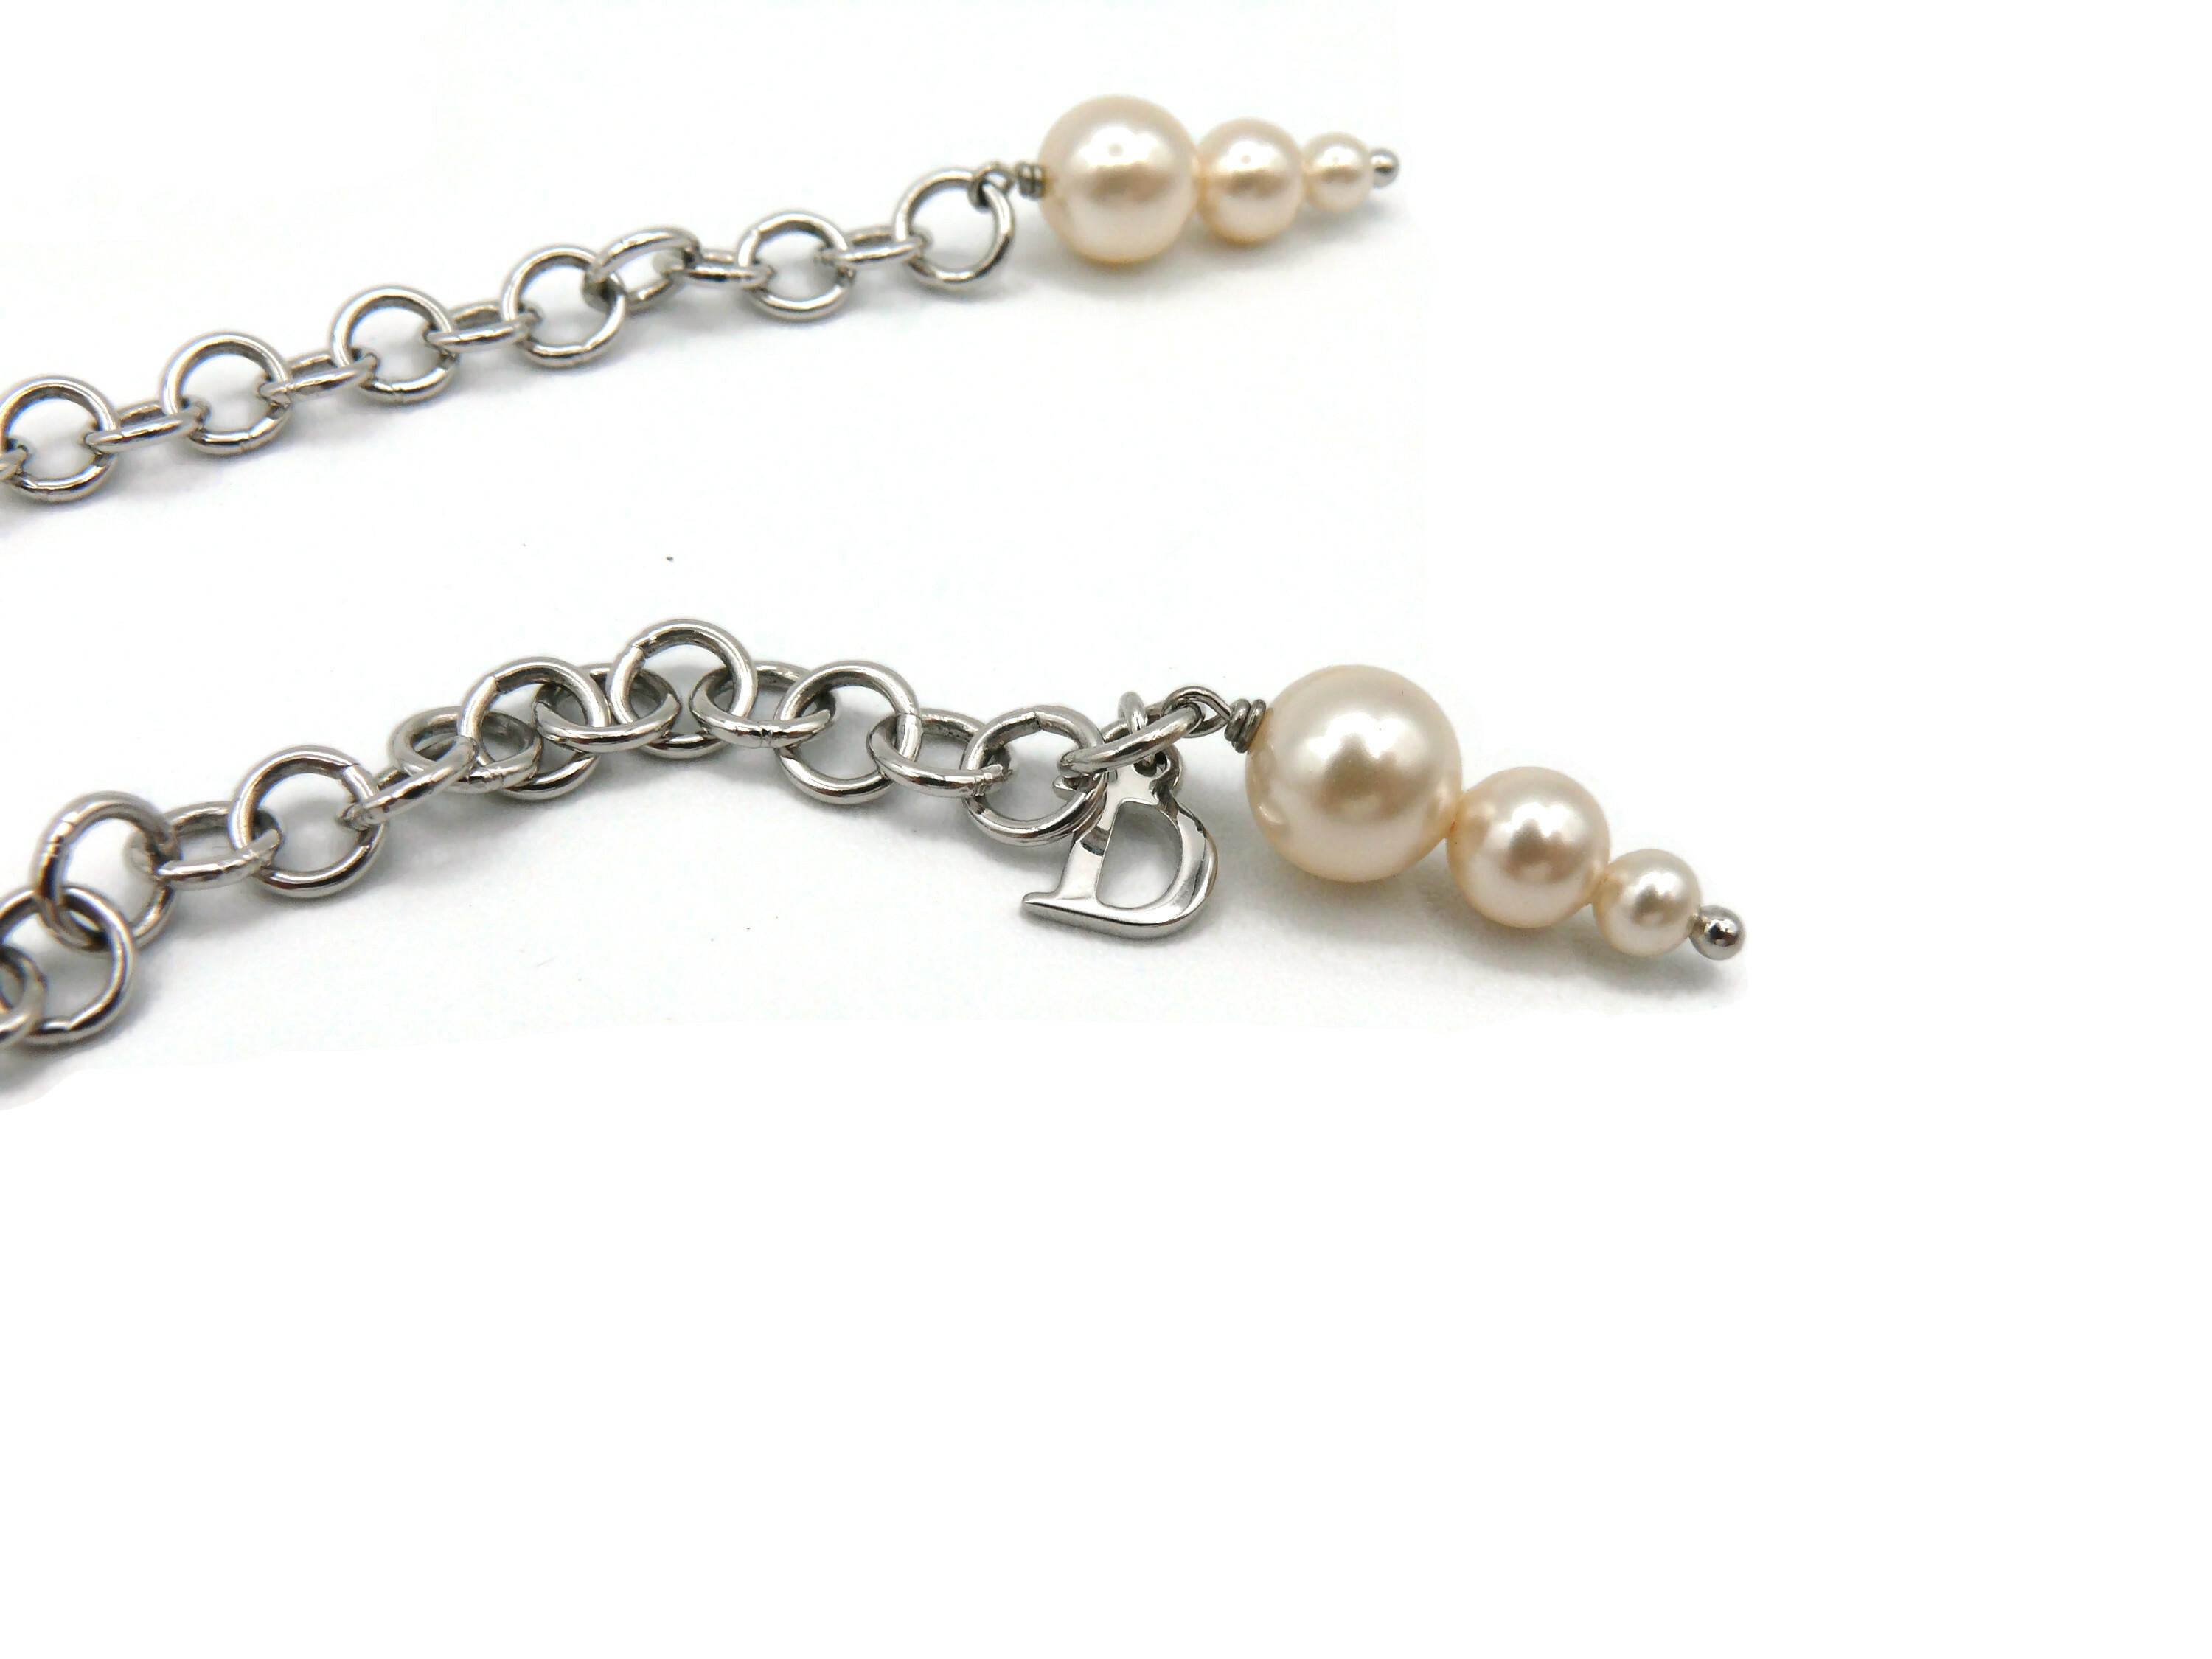 CHRISTIAN DIOR Faux Pearl Choker Necklace 6